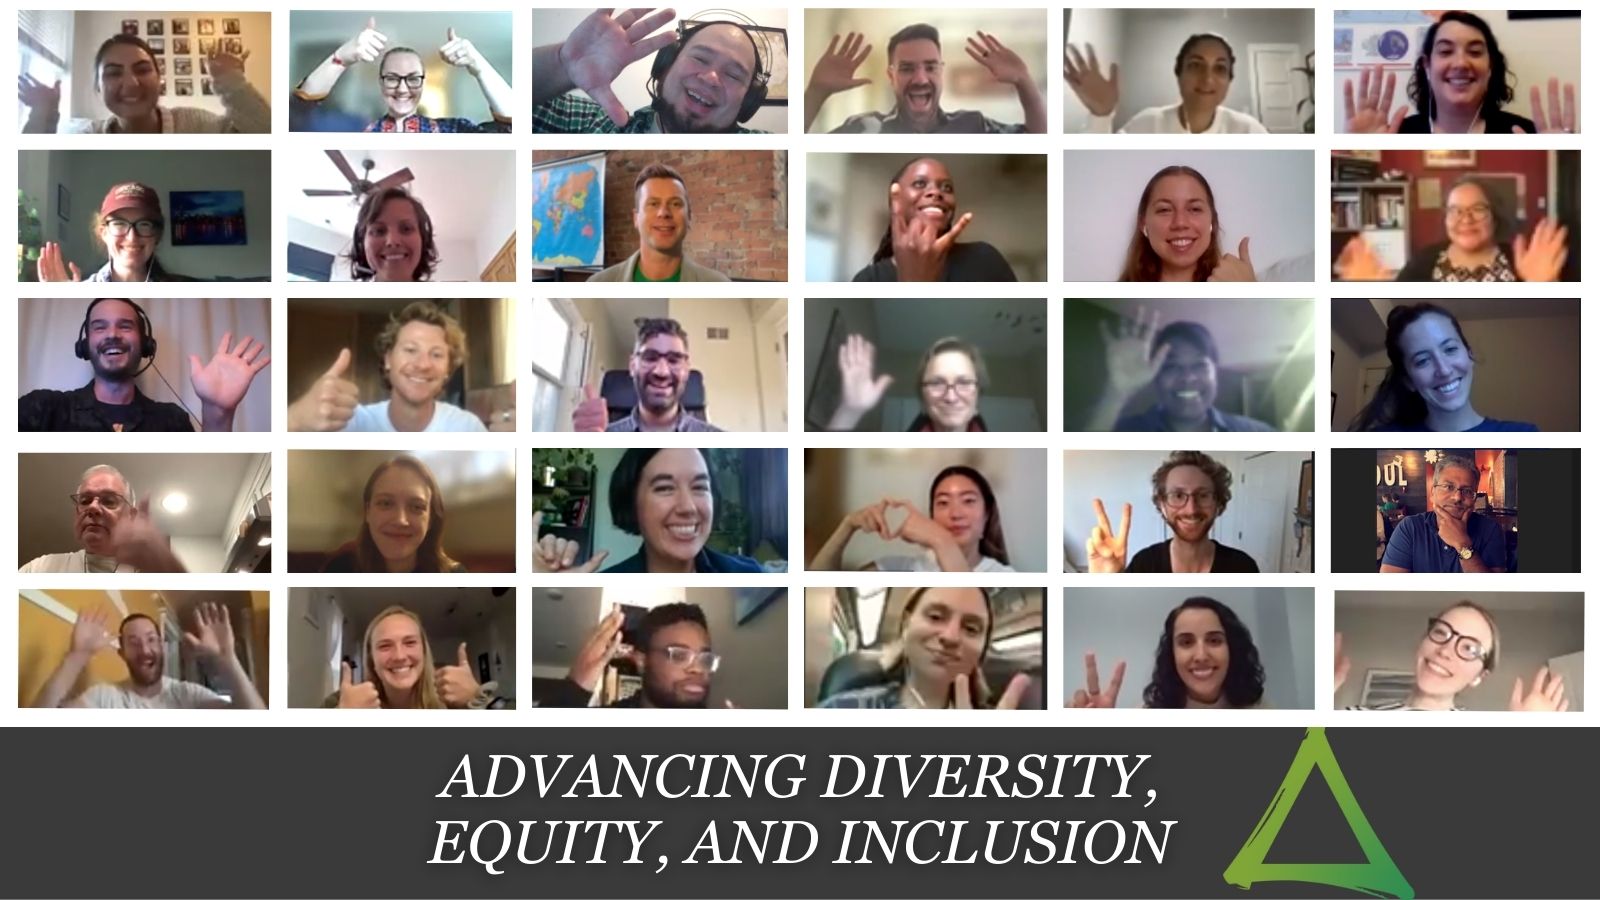 Collage of staff and board members with the words "Advancing Diversity, Equity, and Inclusion" at the bottom